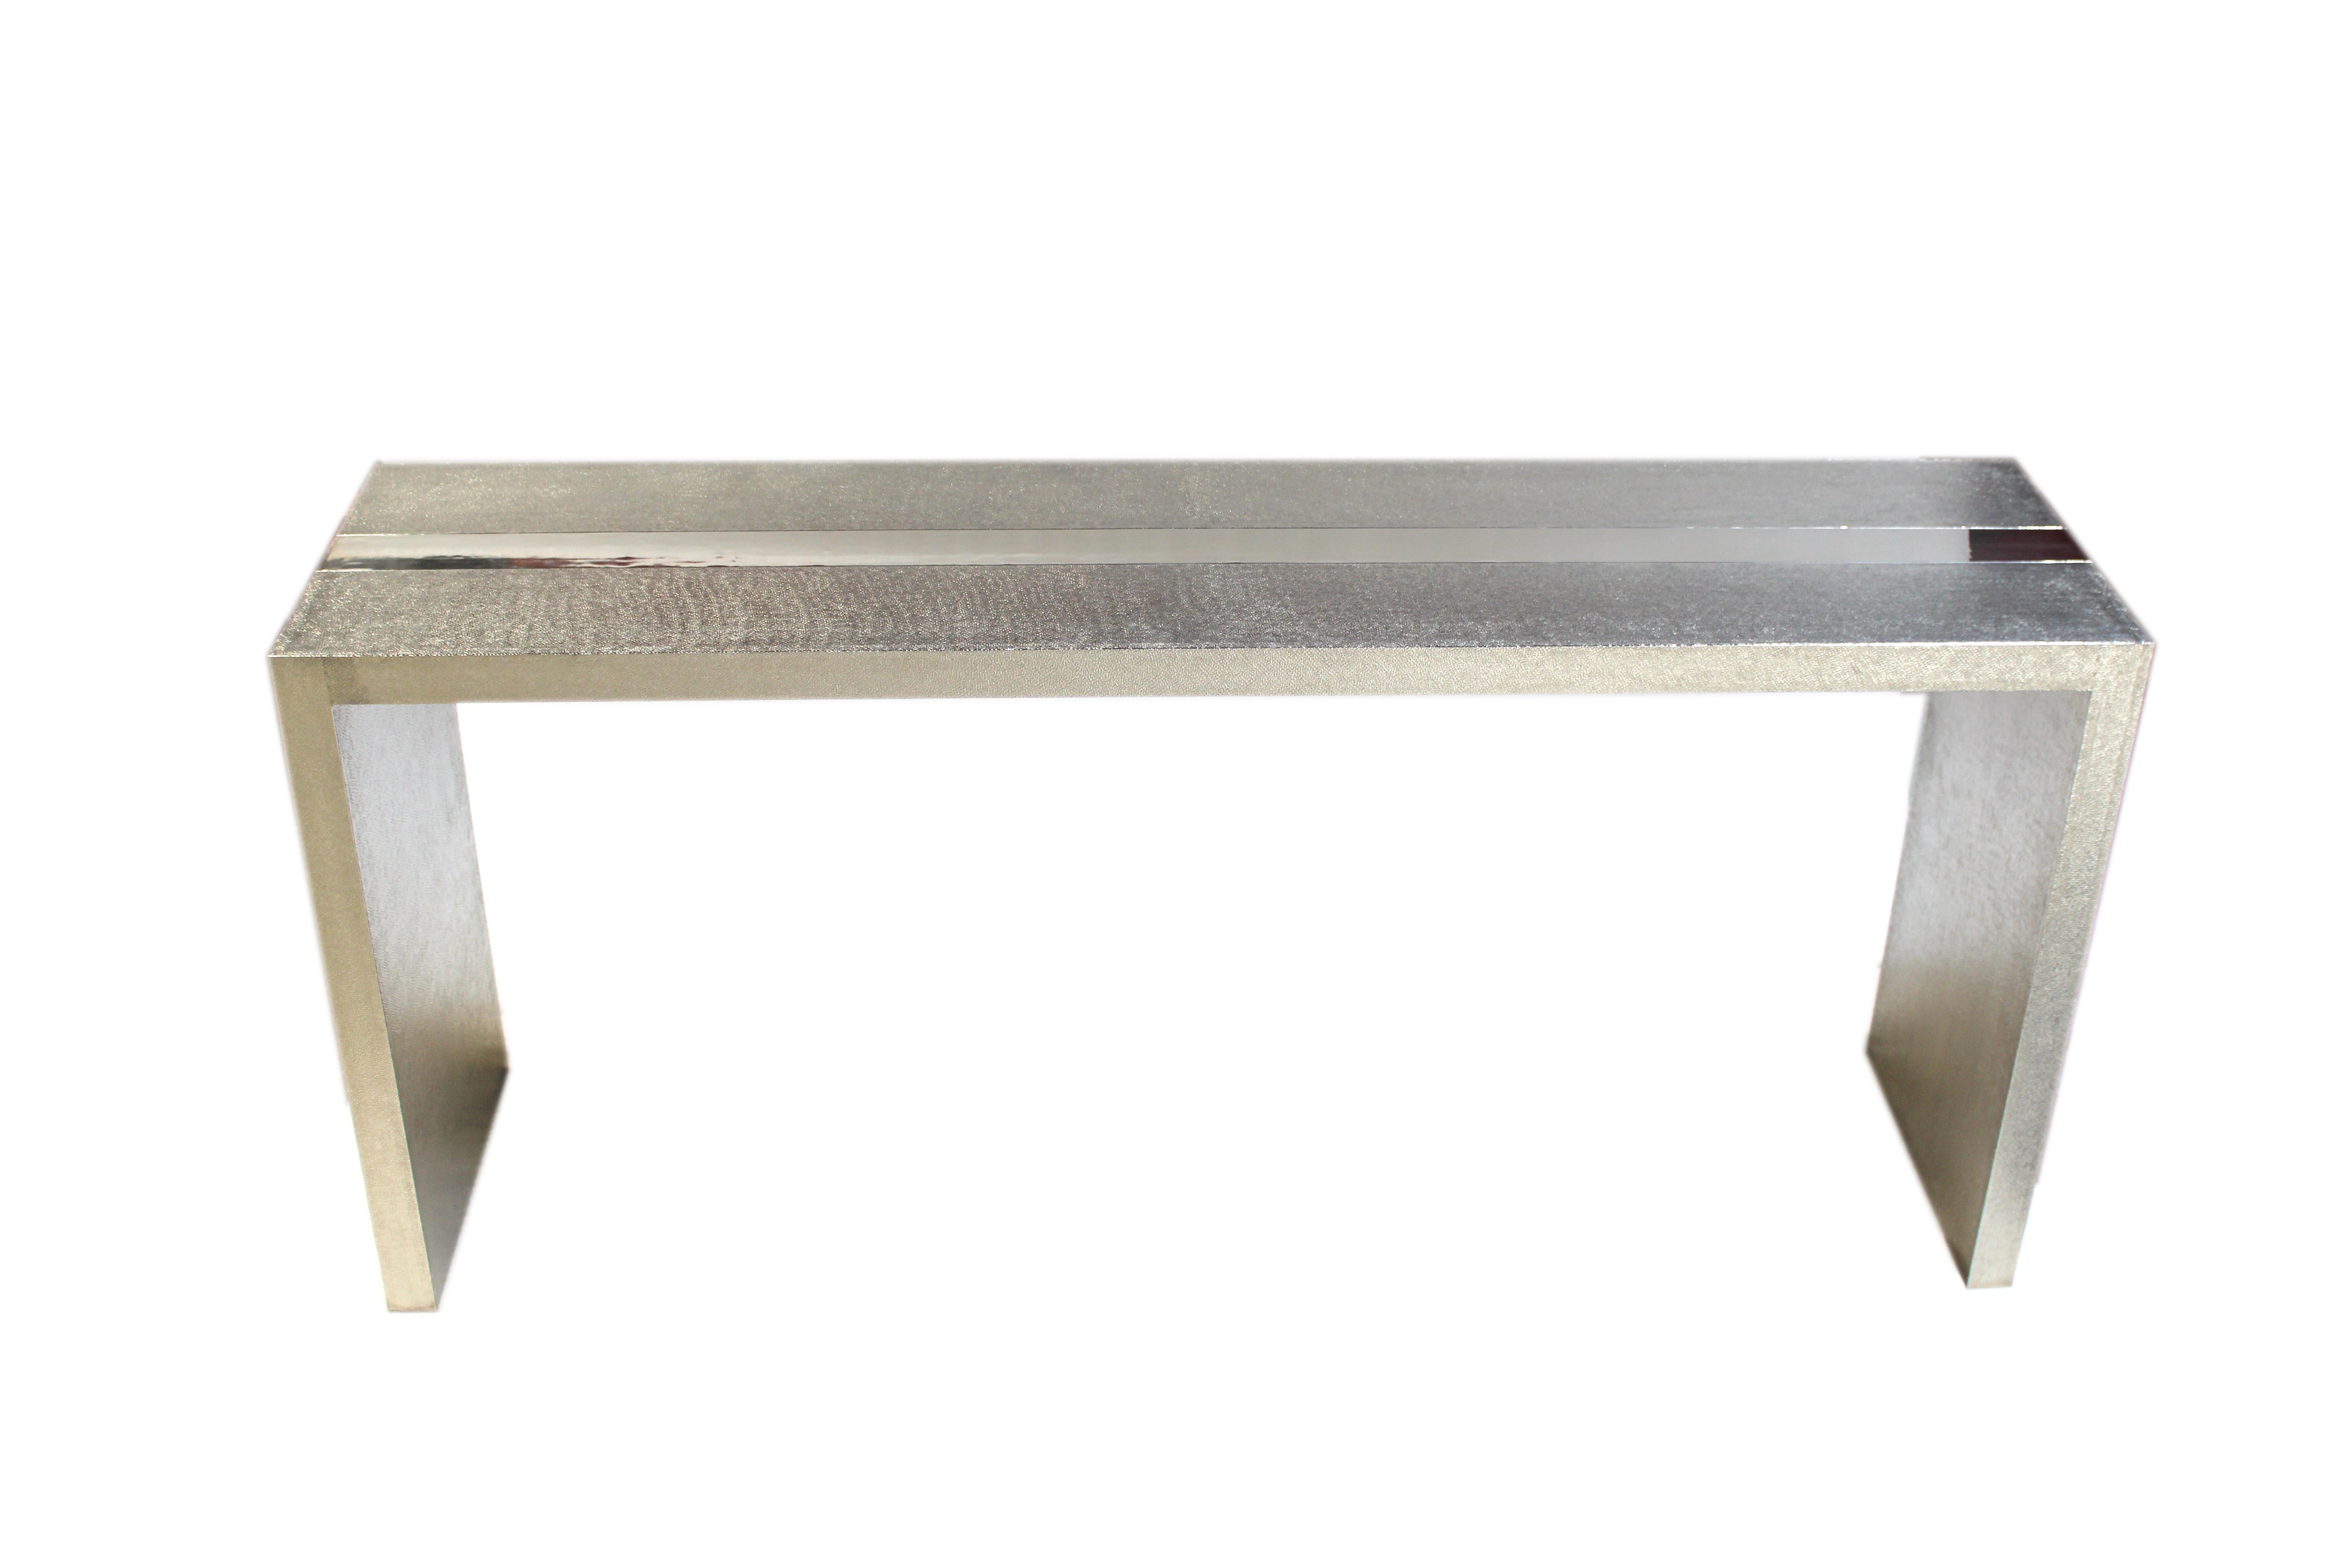 Art Deco Rectangular Console Tables Mid. Hammered White Bronze by Alison Spear For Sale 7